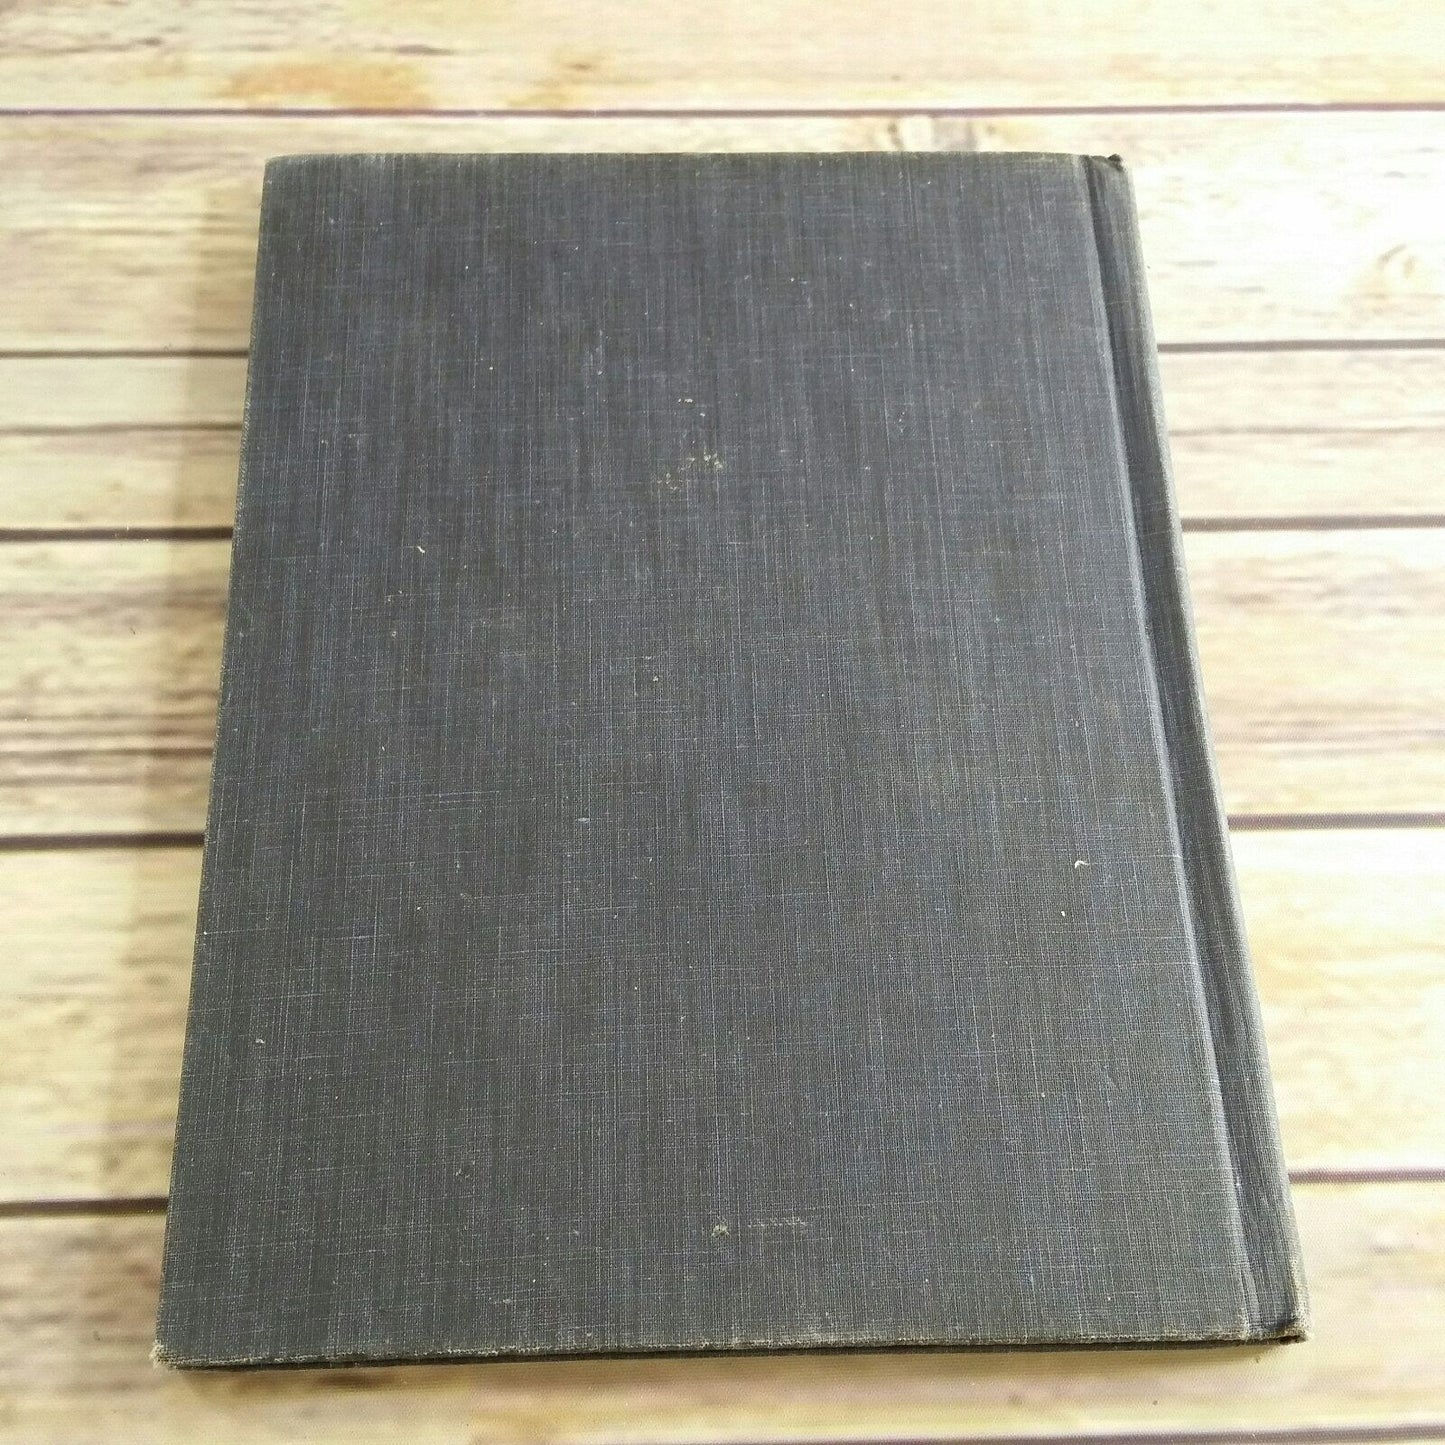 Vintage Cookbook Barbecue Cook Book Better Homes and Gardens Charcoal Grill 1956 Hardcover NO Dust Jacket